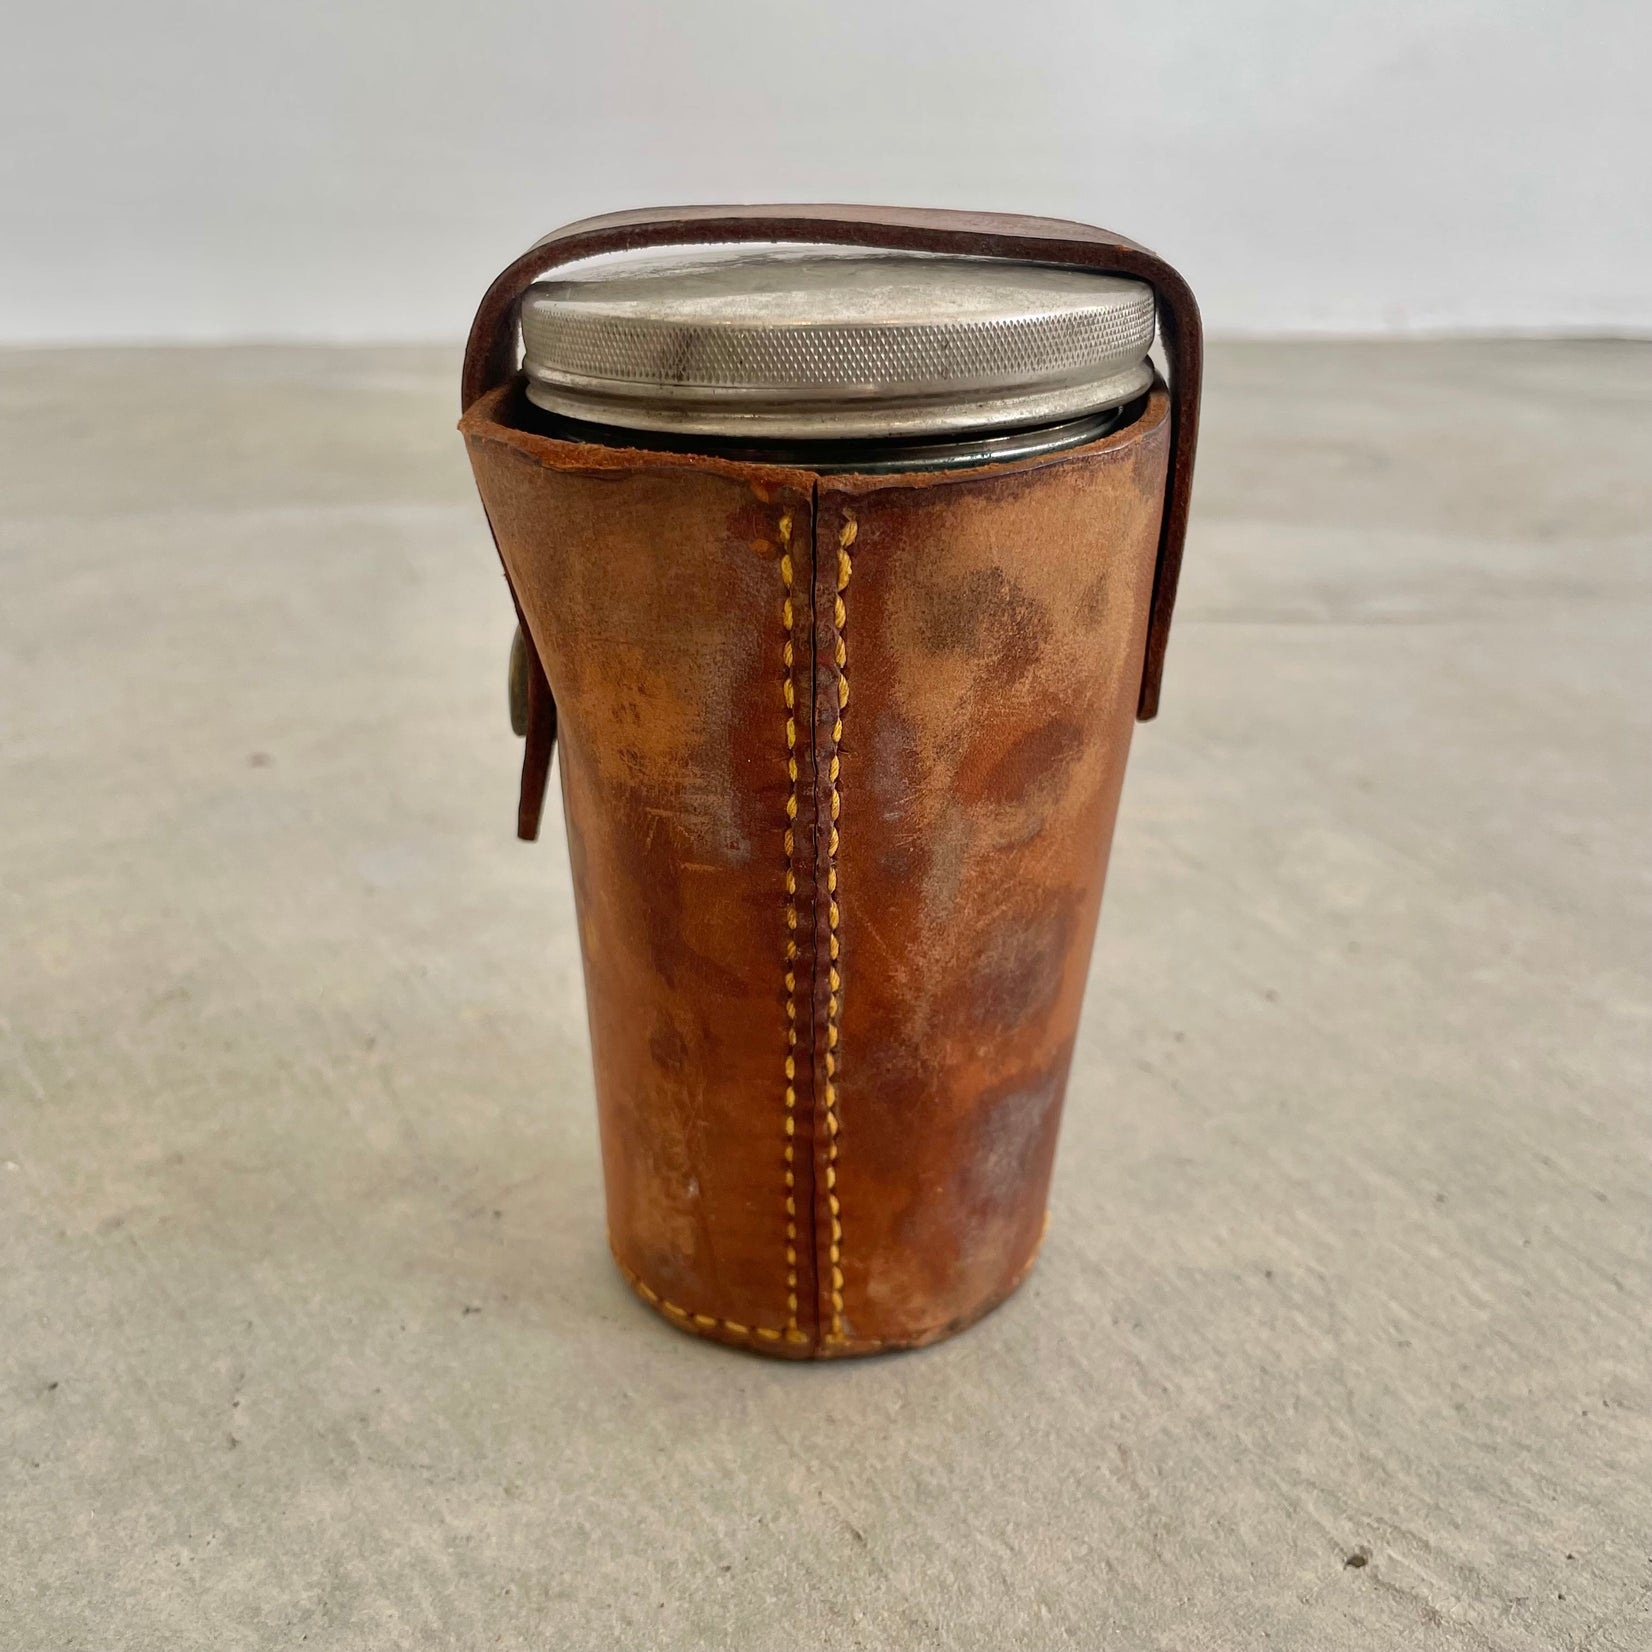 Vintage Thermos Cup Set, 1912 USA